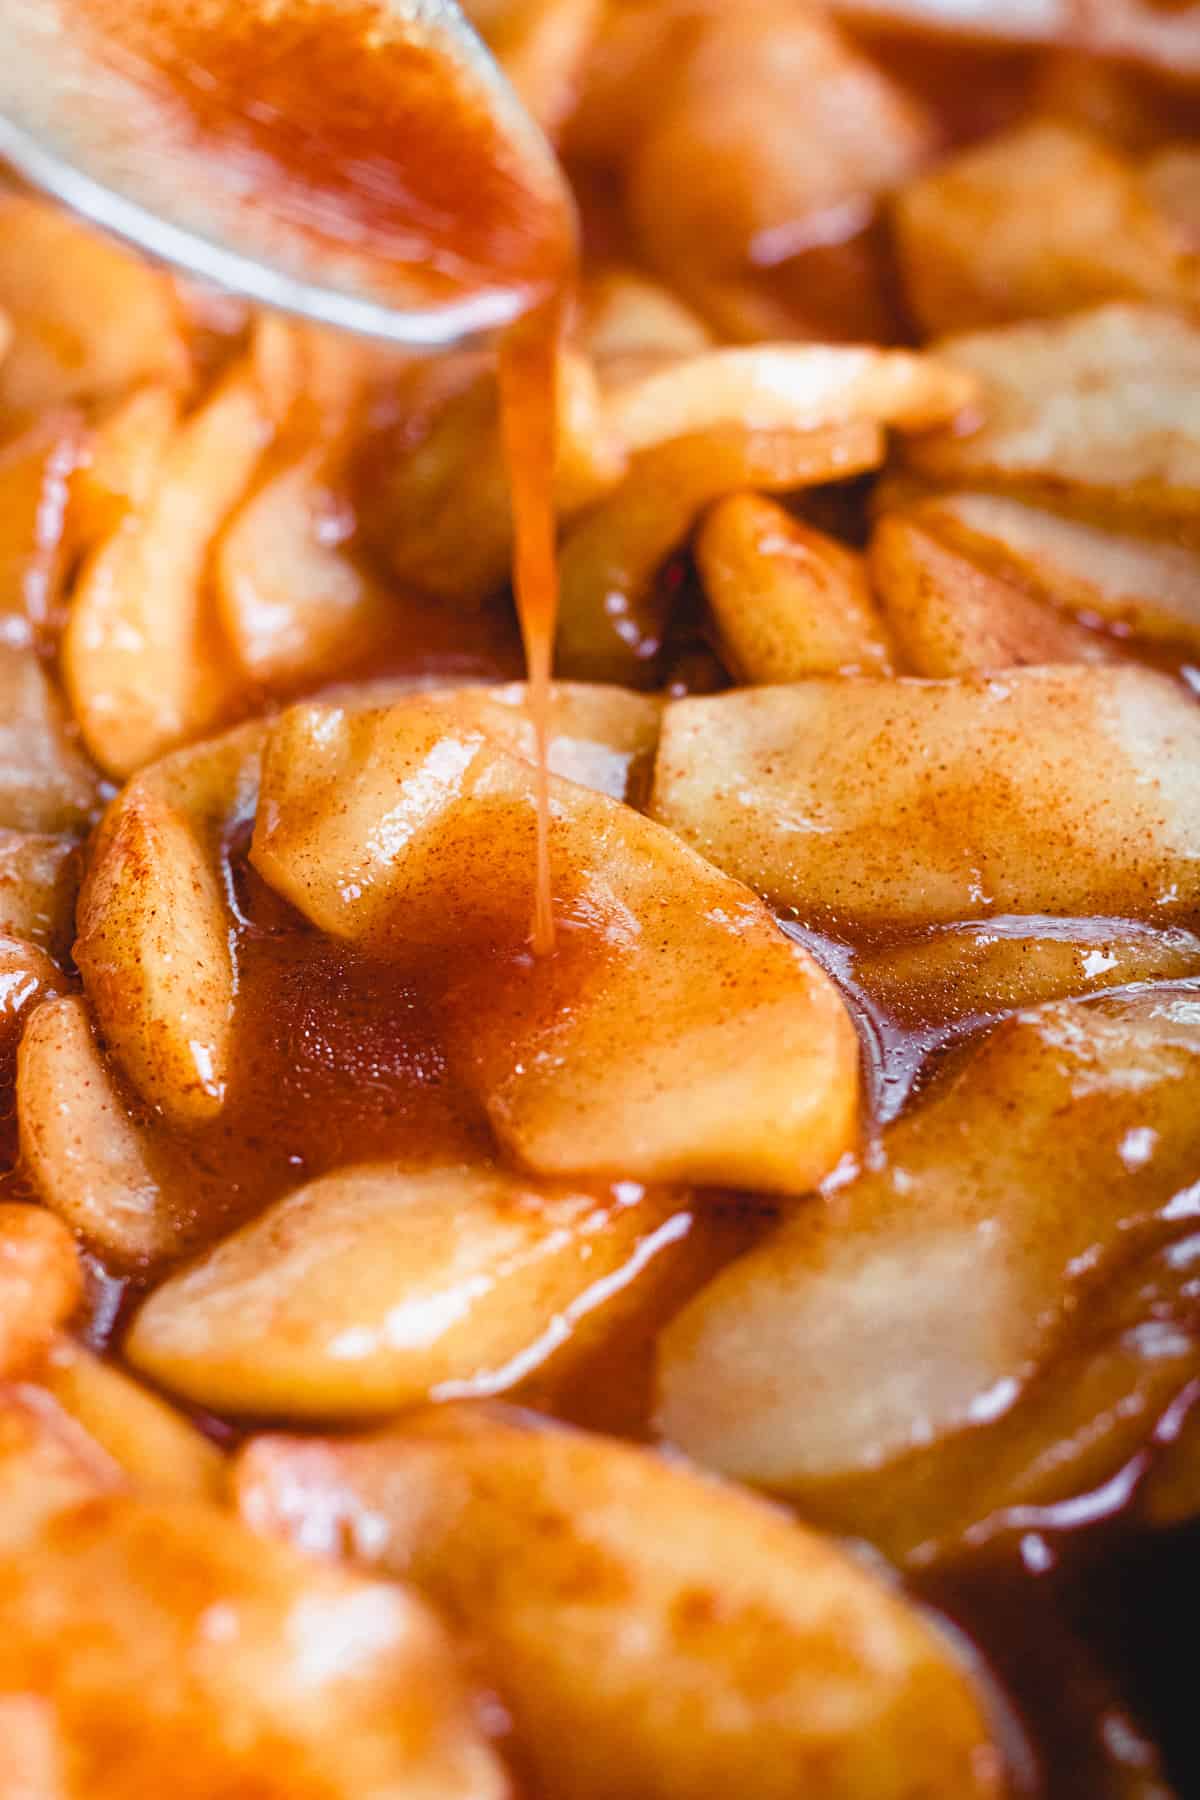 Pouring sauce over baked apple slices.